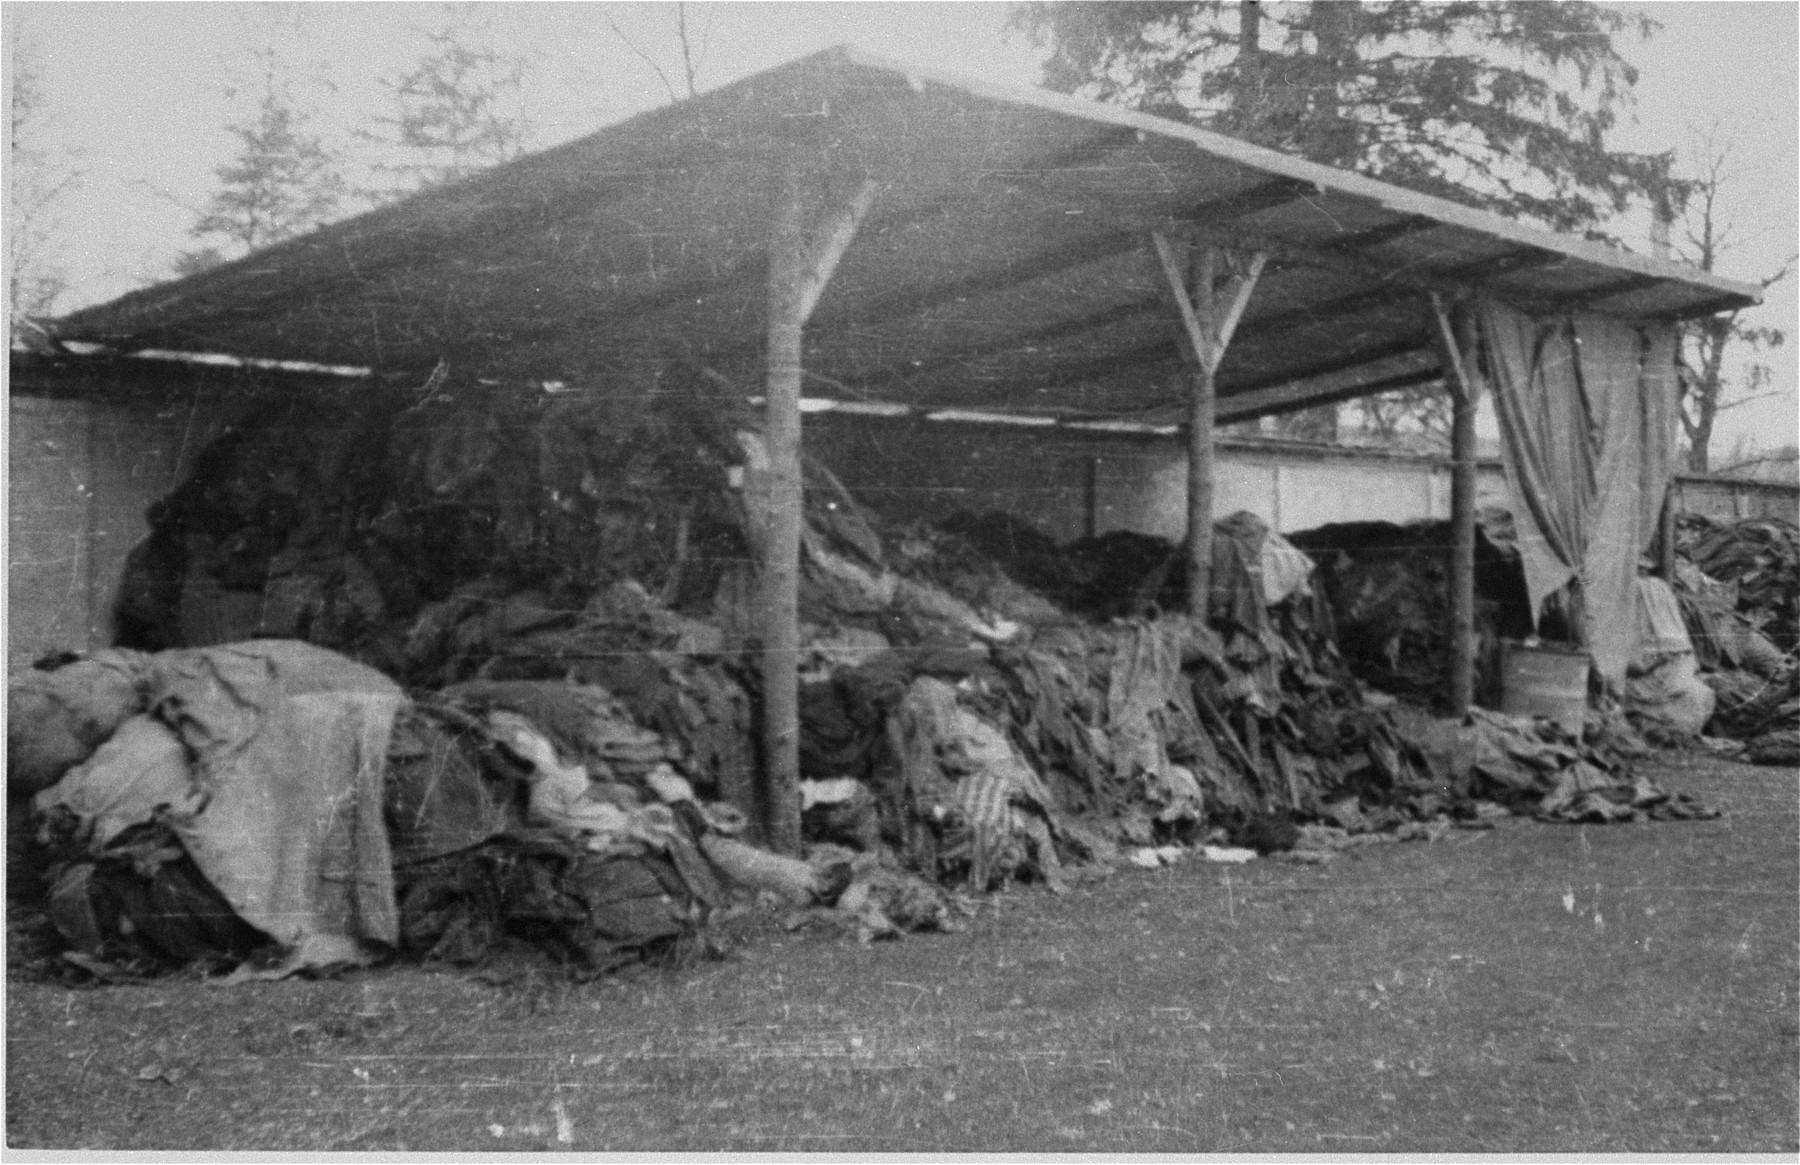 Prisoners clothing piled outside under an overhang.